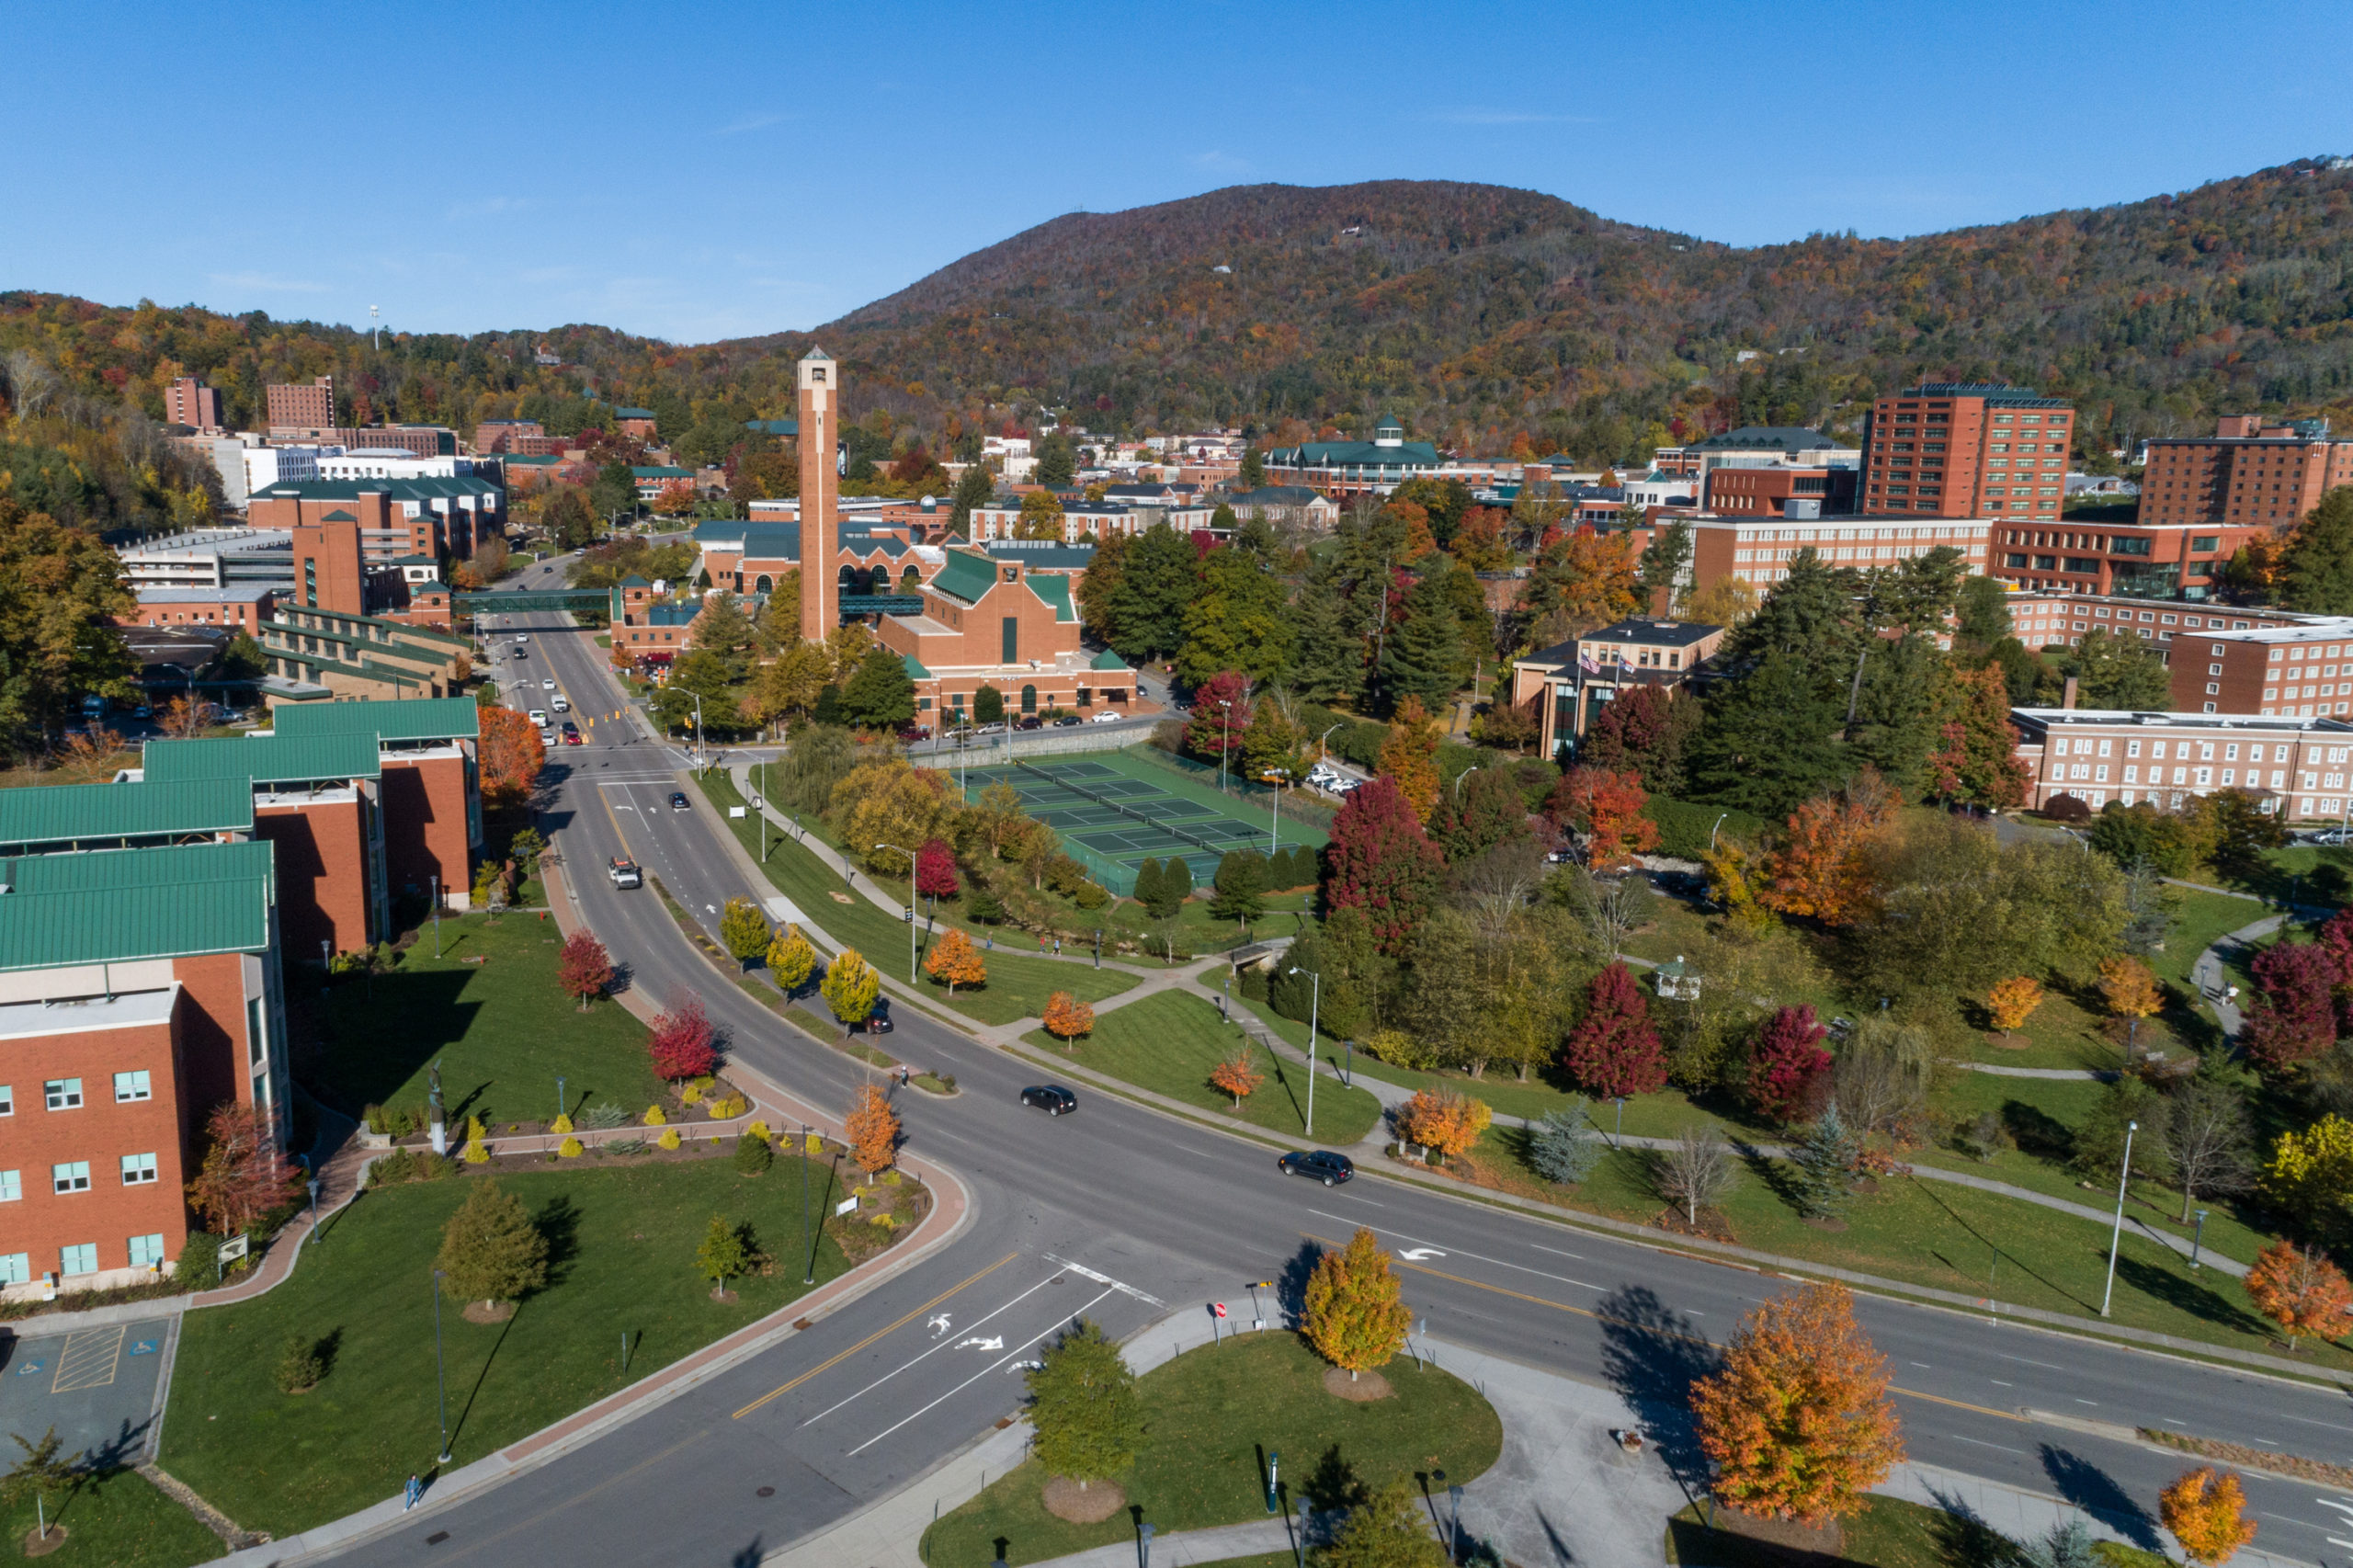 Arial view of App State